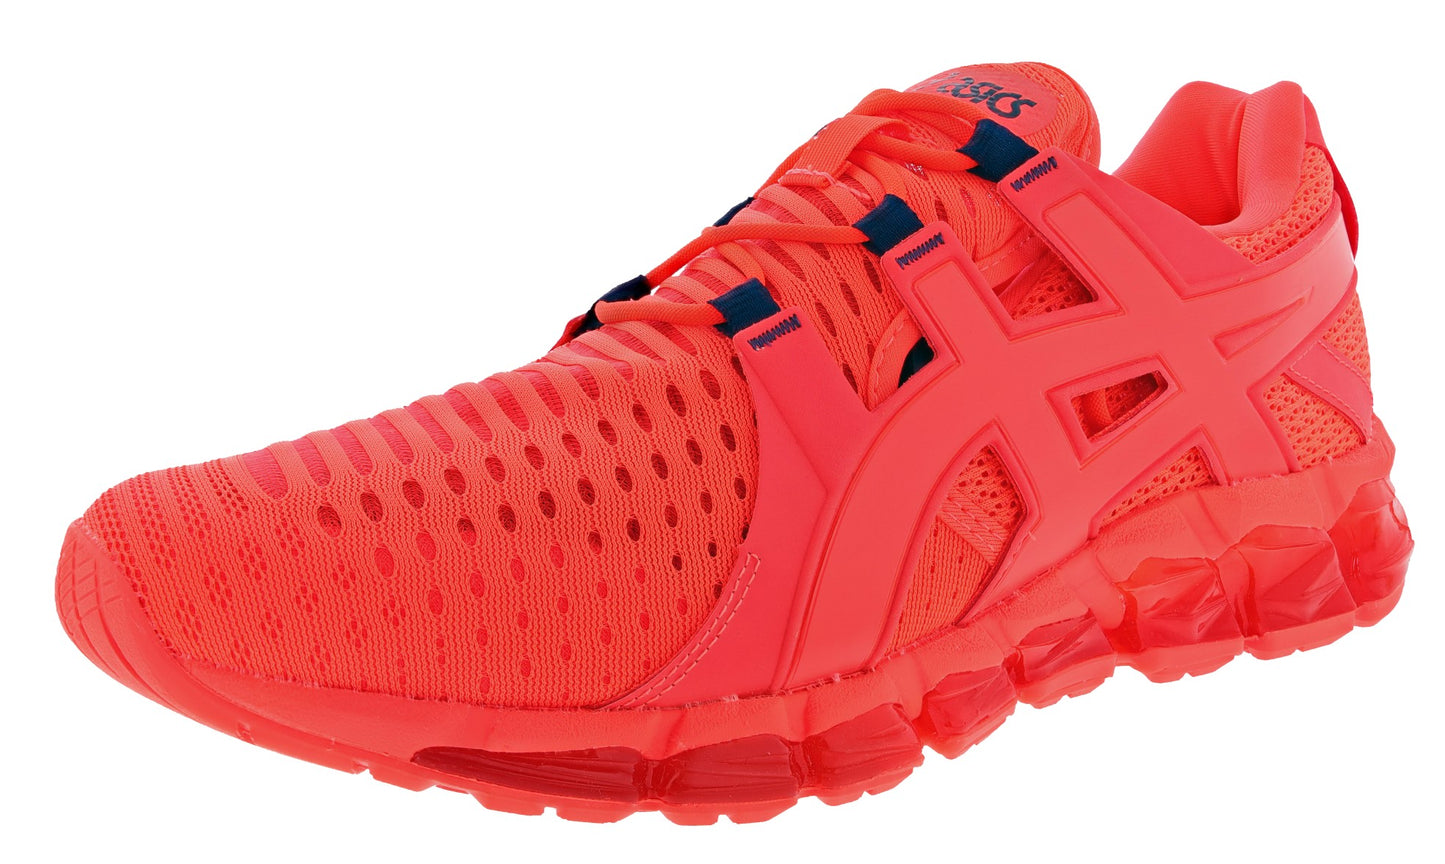 Lateral of Sunrise Red/Midnight Asics Men's Gel-Quantum 360 6 Tokyo Lightweight Running Shoes